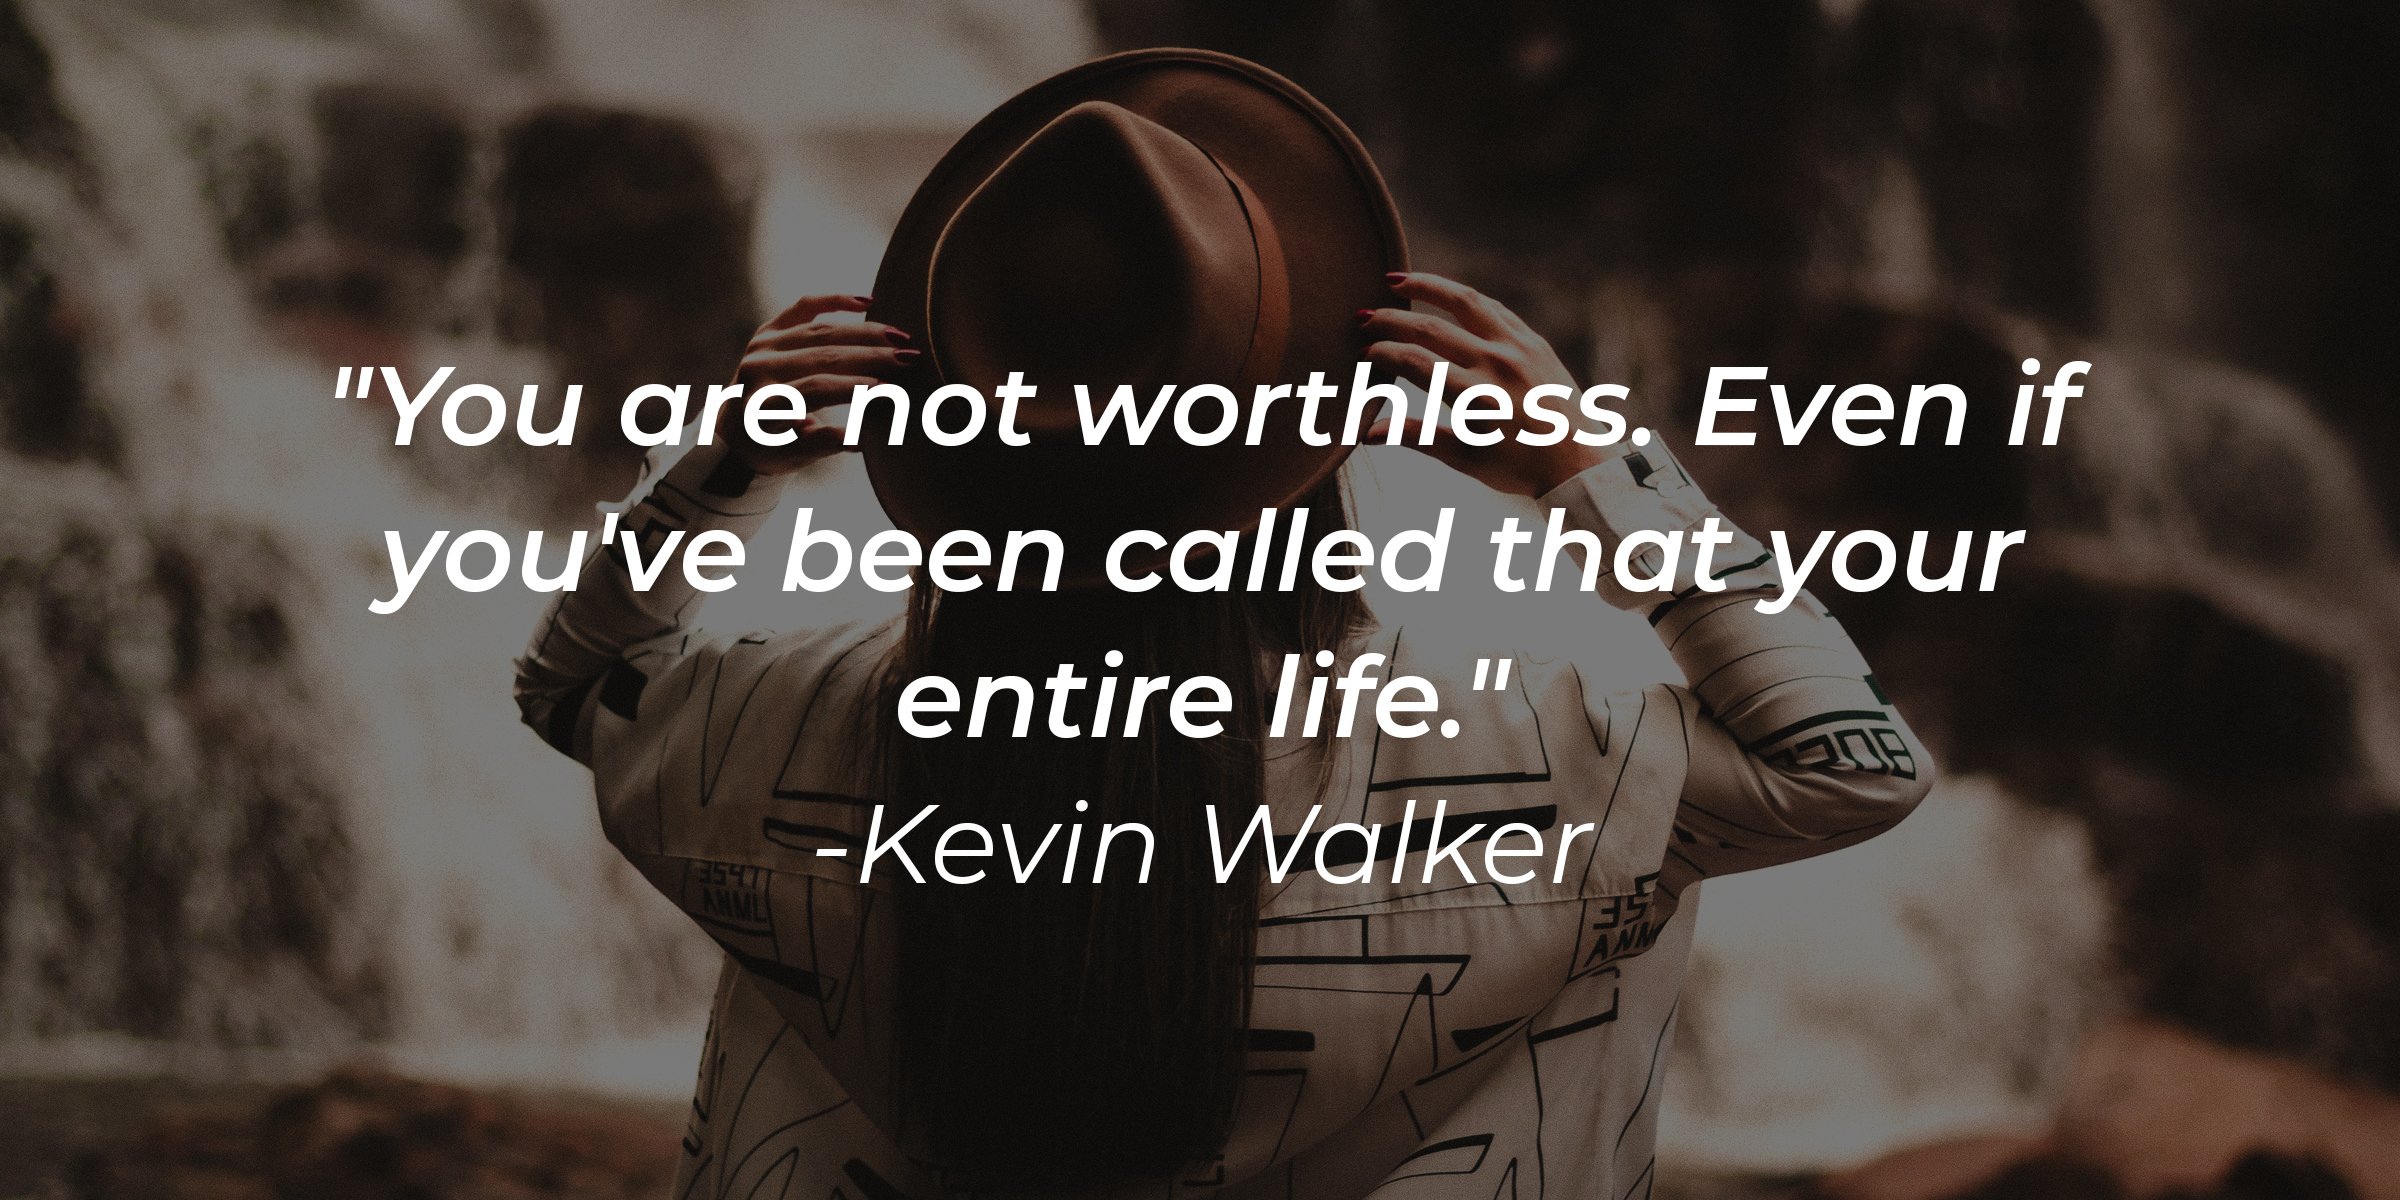 Source: Unsplash | Woman holding her hat with her back turned combined with the quote: "You are not worthless. Even if you’ve been called that your entire life."